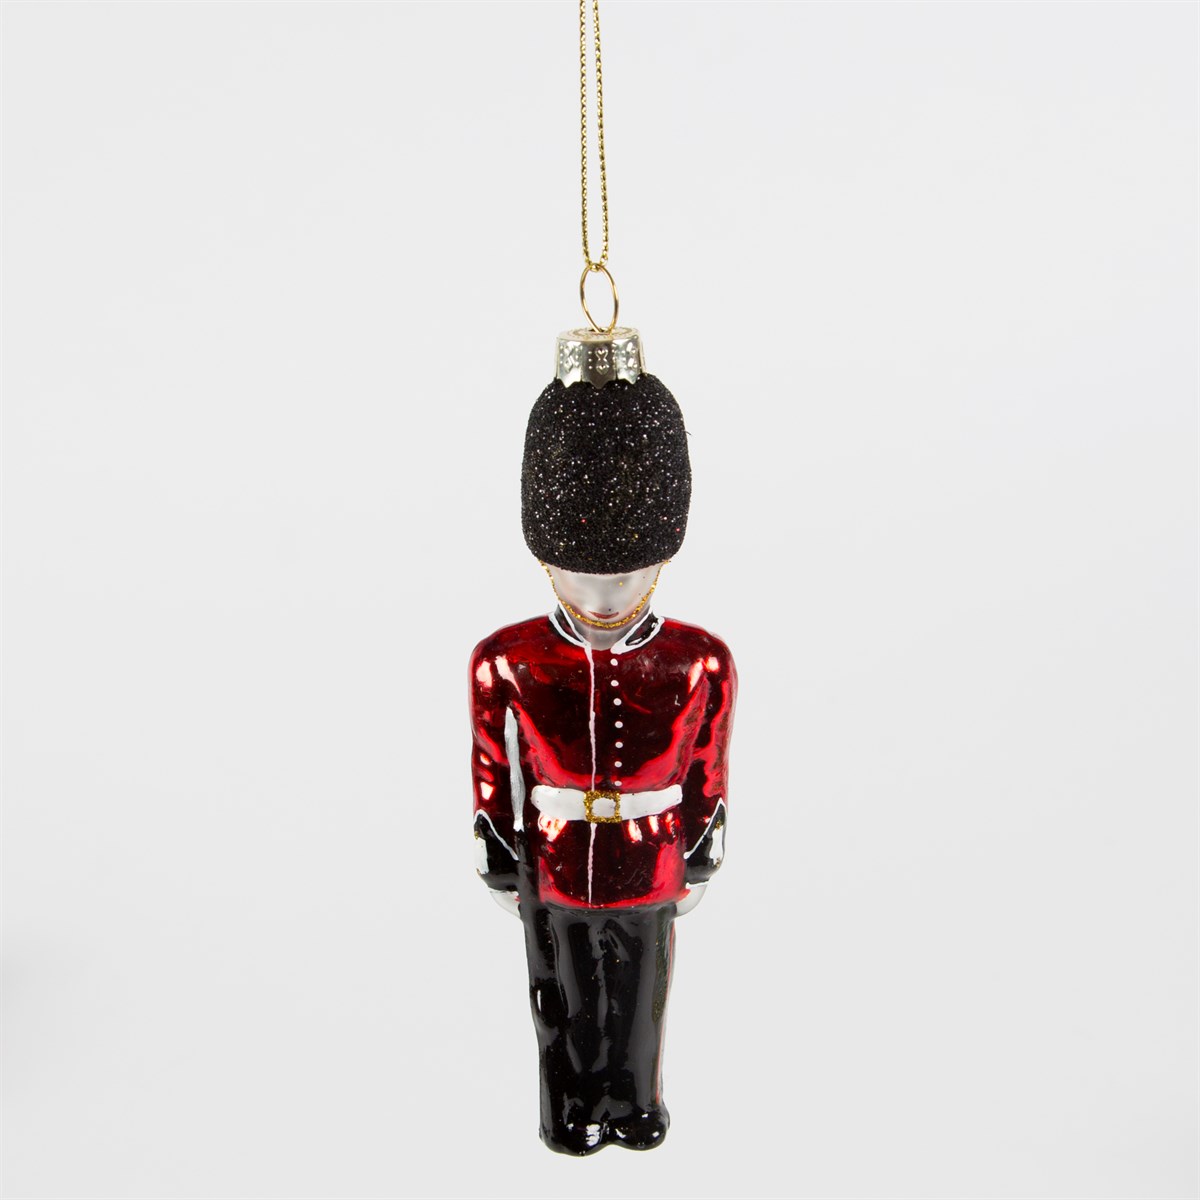 Create a traditional theme this festive season with these iconic London themed Christmas tree decorations. Featuring Big Ben, a red London post box, and a member of the Queen's Guard.